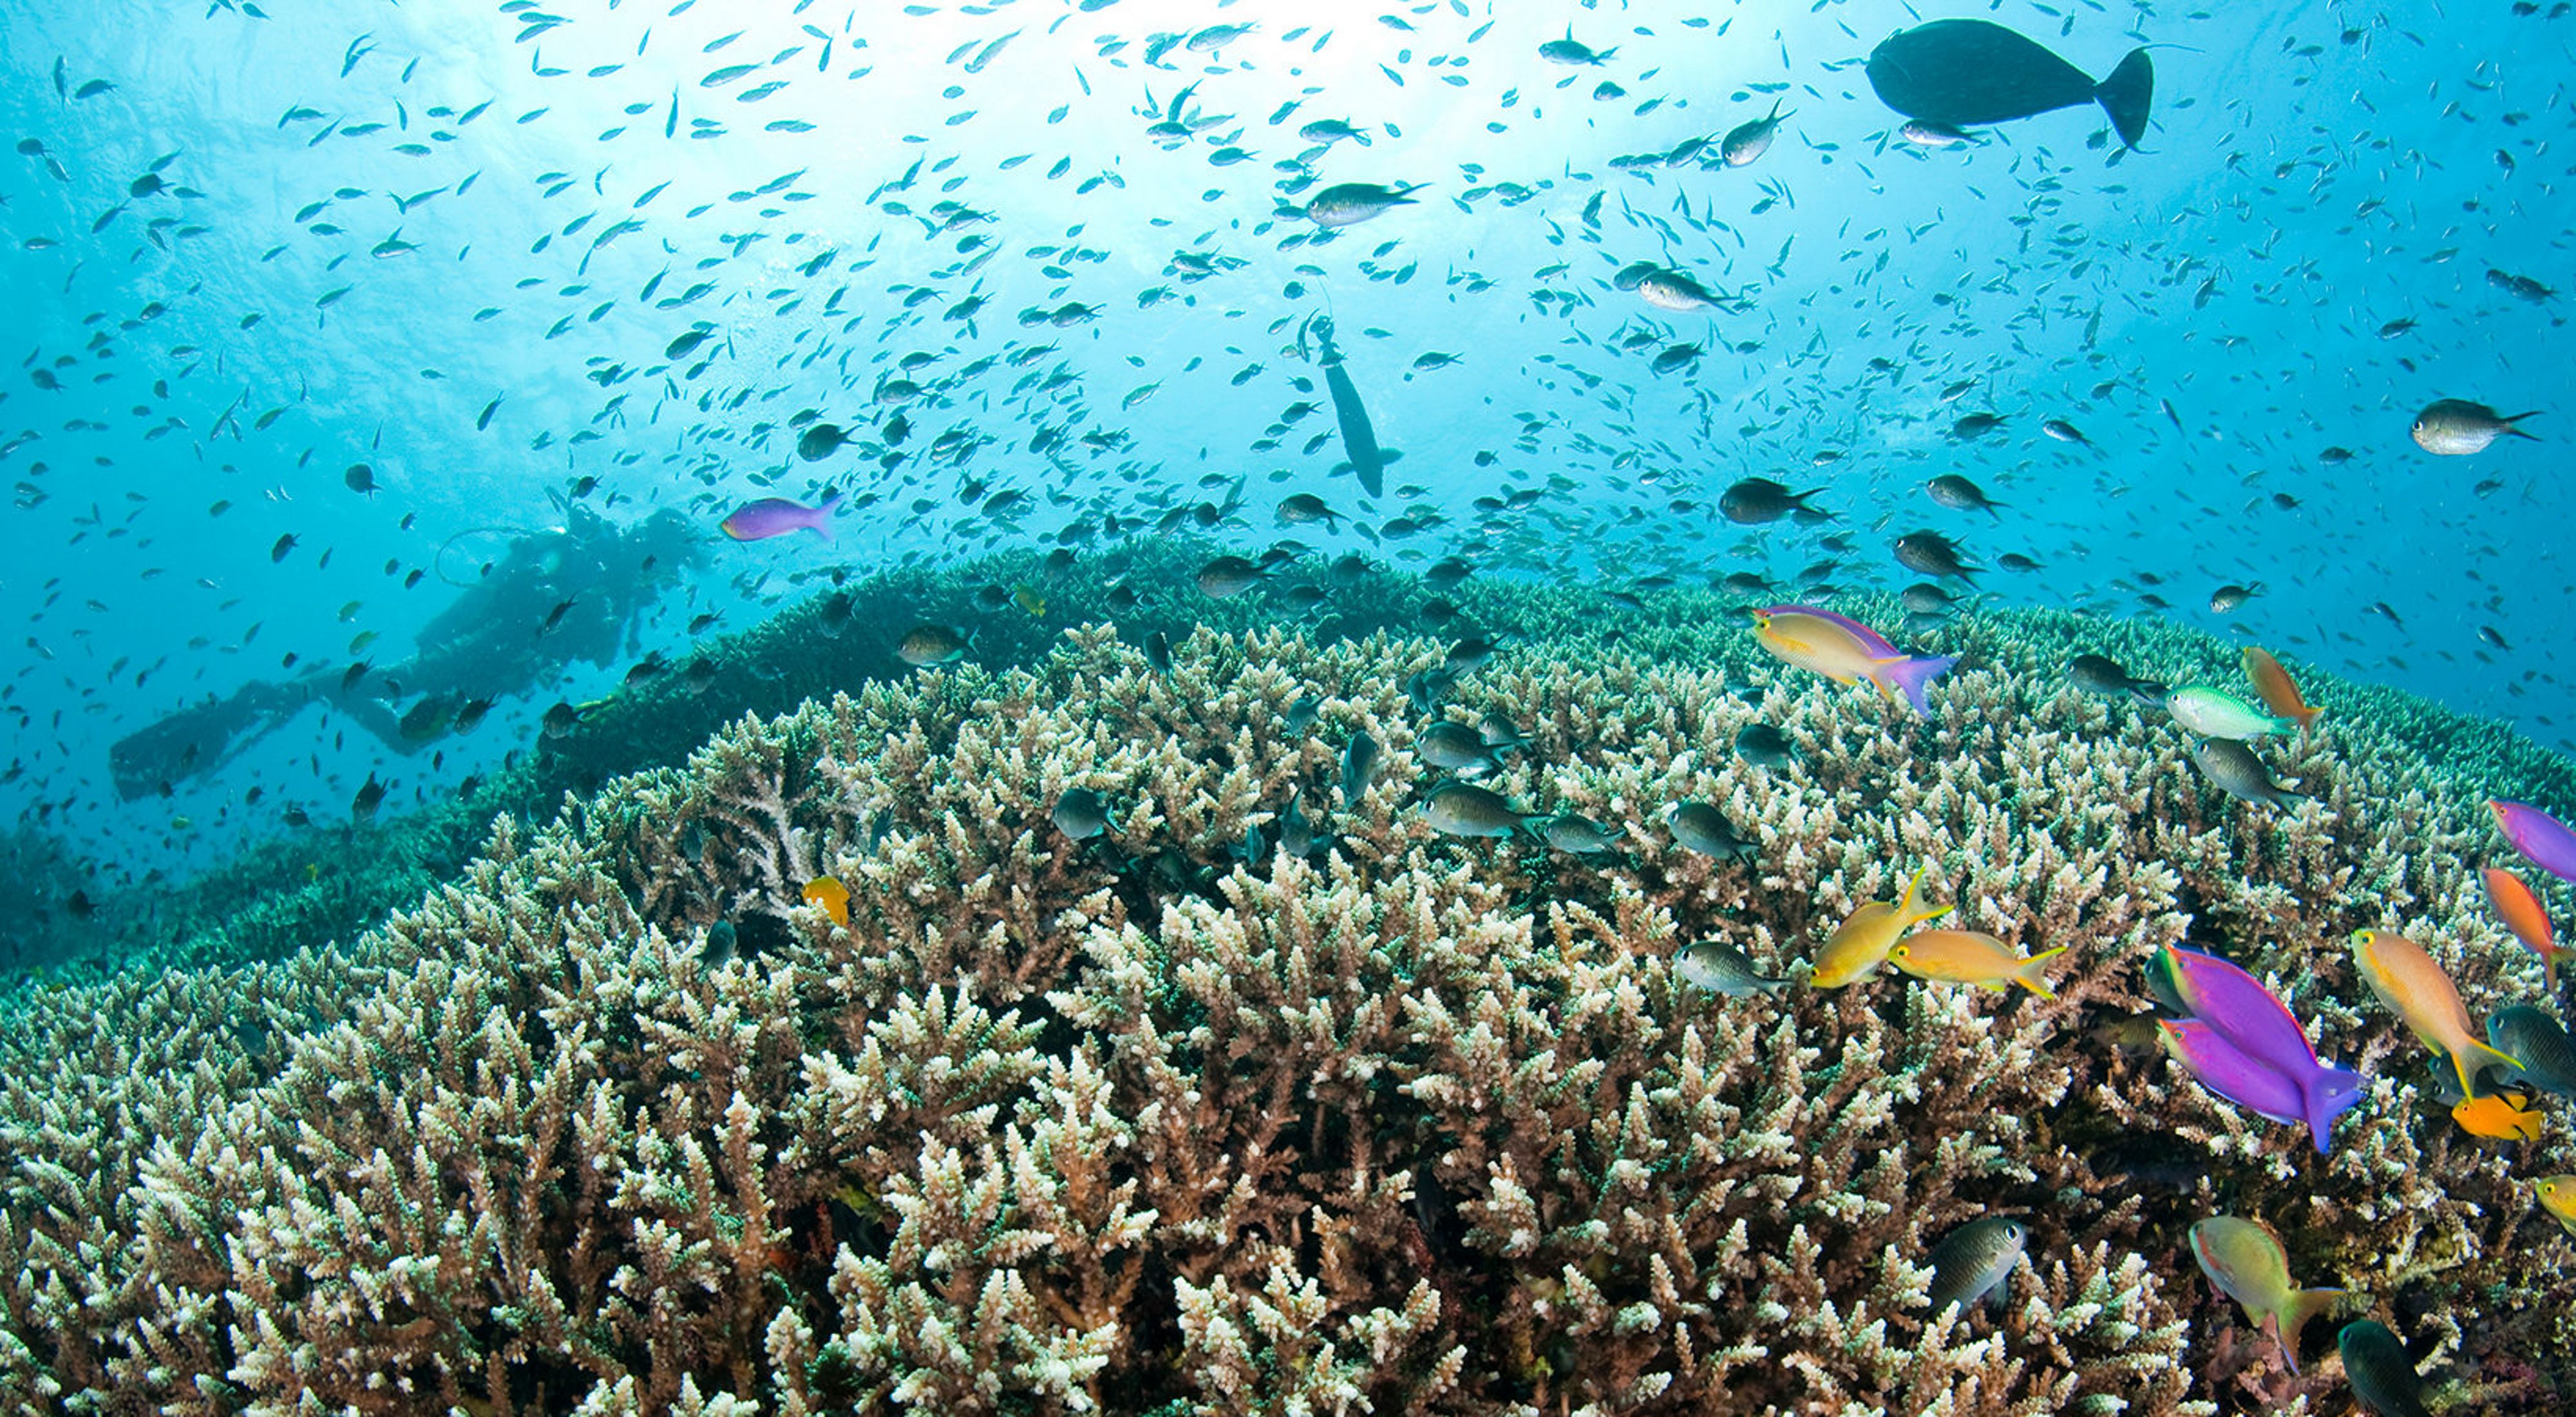 A diver explores a hard coral reef with Anthias and Damsels in the shallow waters off Amed (Jemeluk) near Bali, Indonesia.